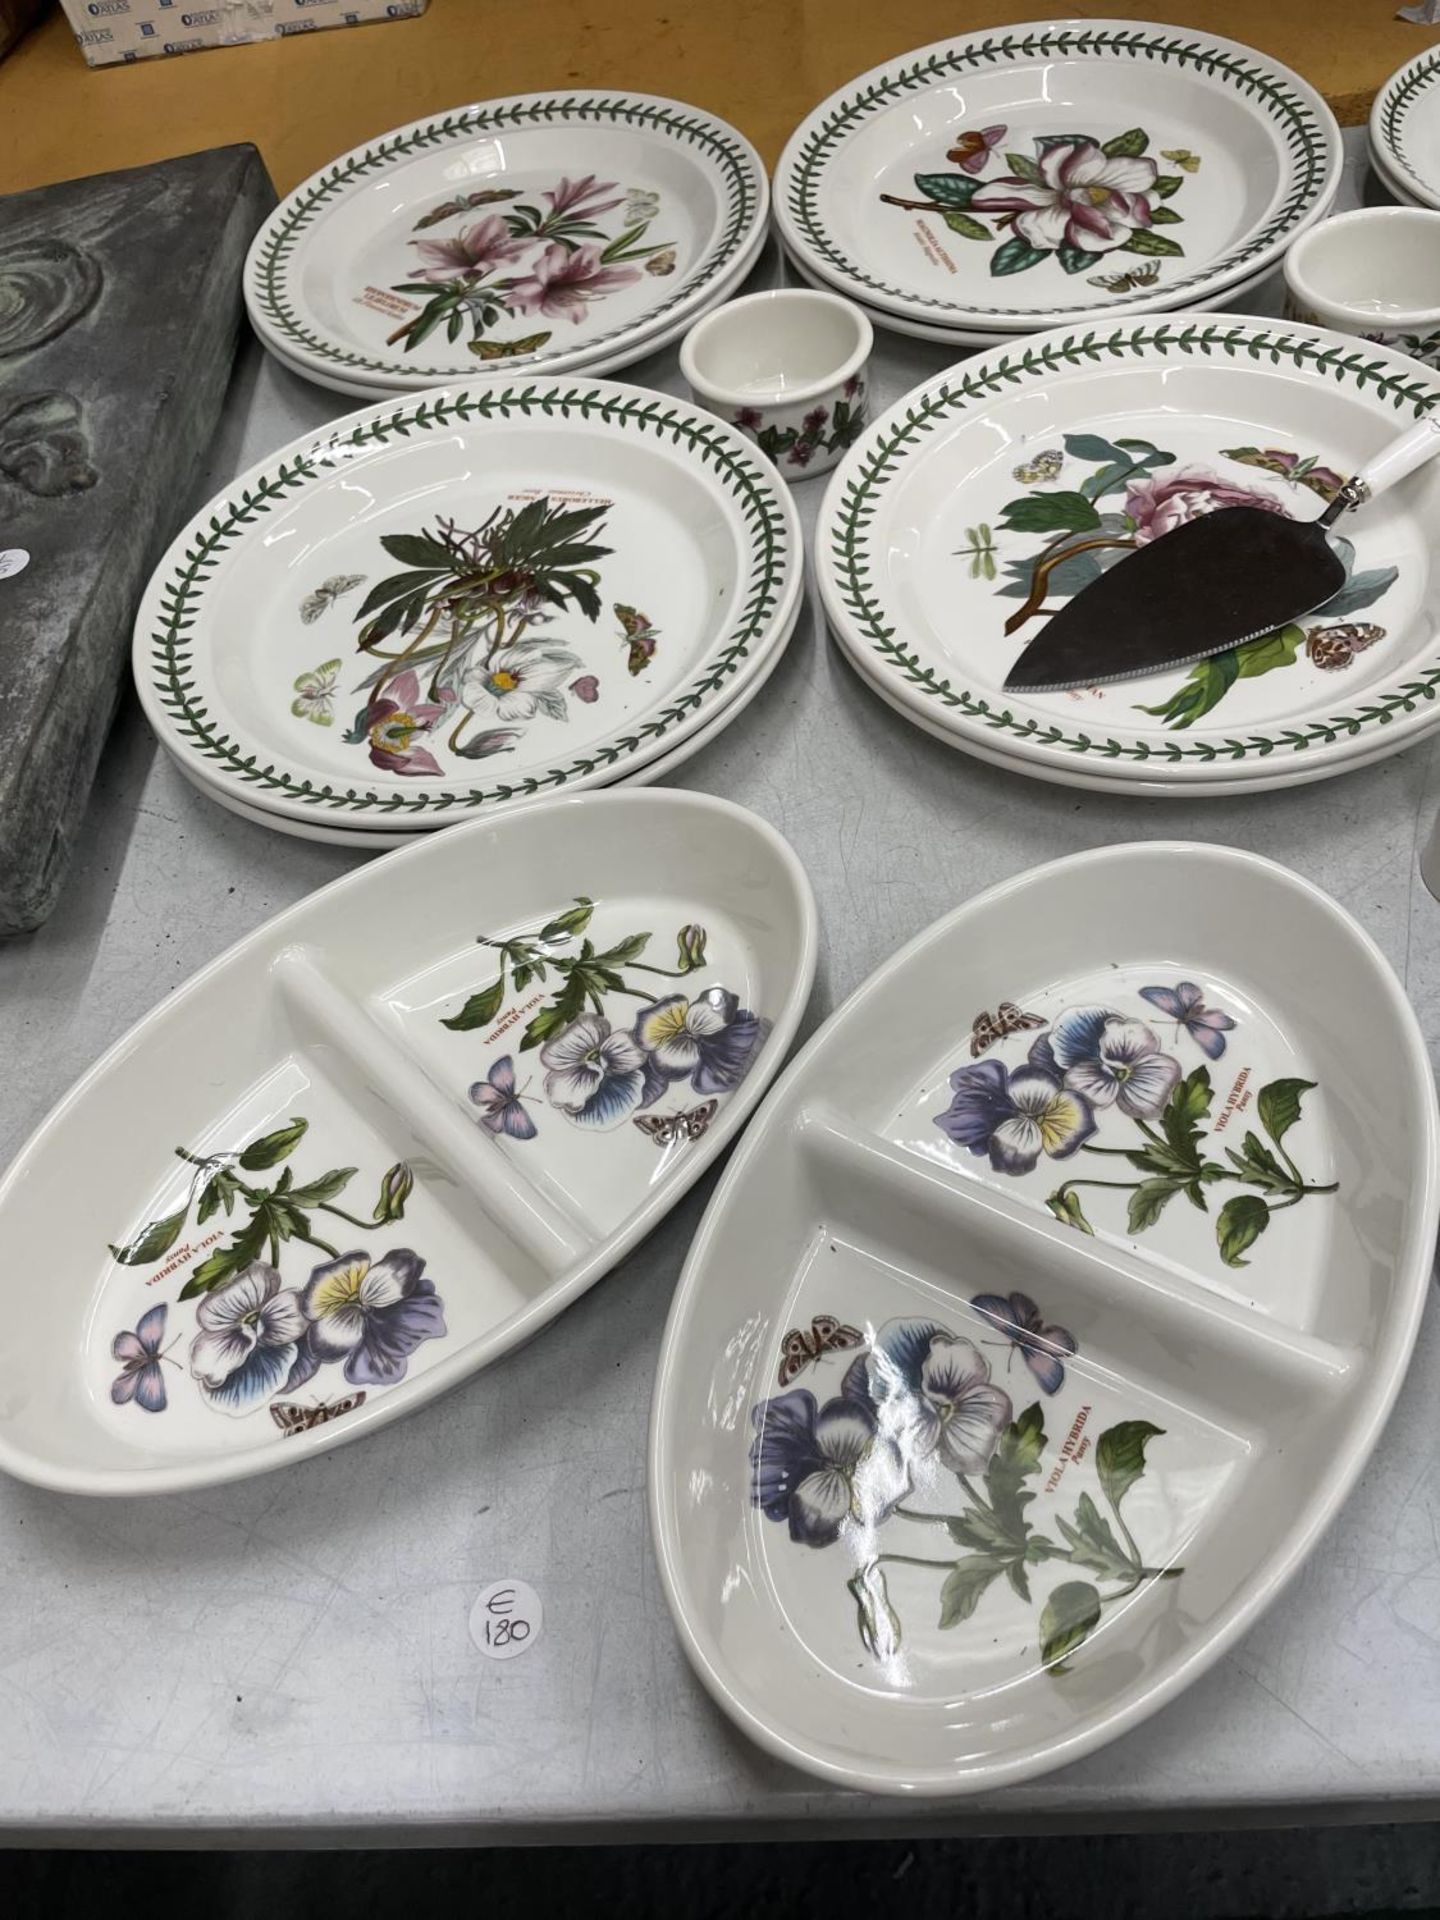 FIFTY FOUR PIECES OF PORTMERION TO INCLUDE BOTANIC GARDEN MUGS, PLATES, CRUETS, JUGS, NAPKIN RINGS - Image 6 of 7